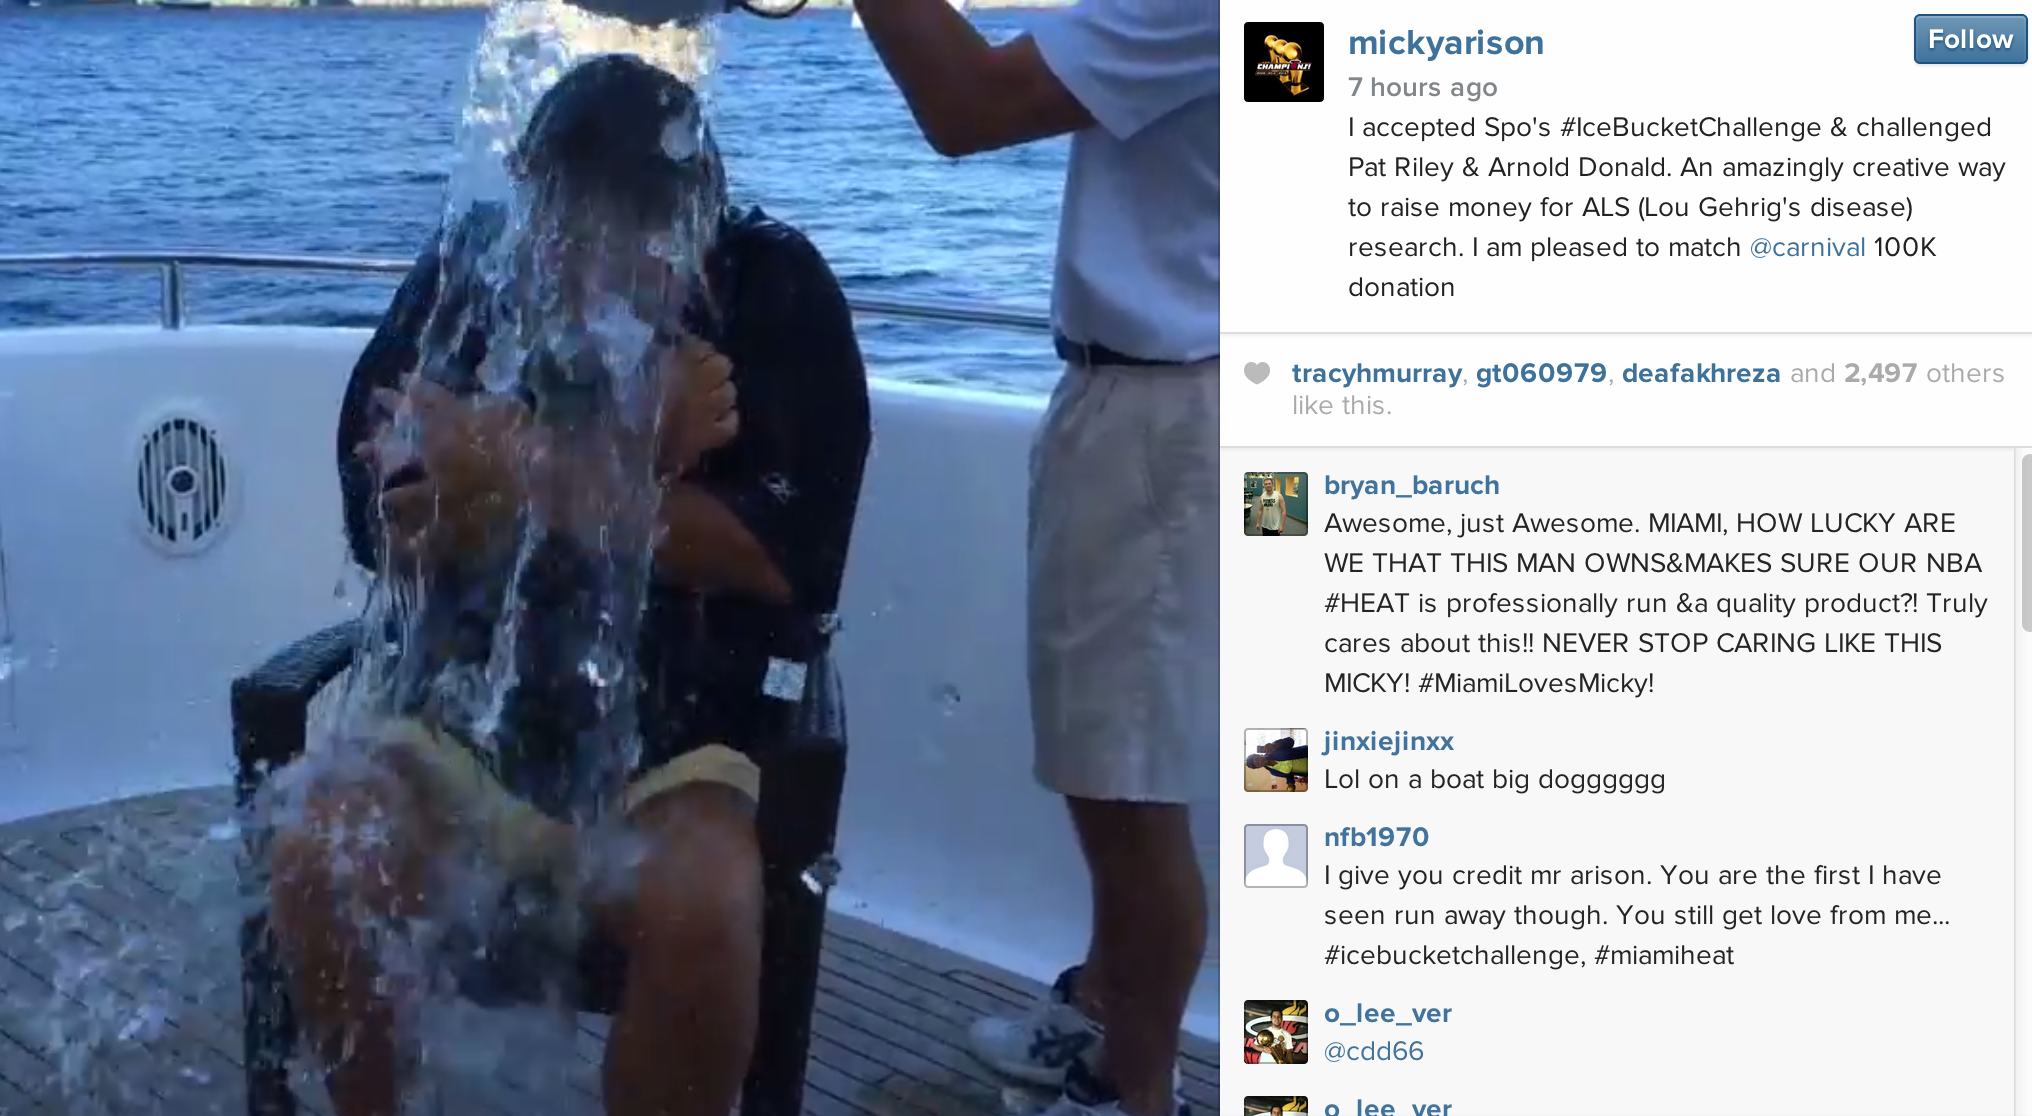 Video: Micky Arison and Coach Spo Accept ALS Ice Bucket Challenge